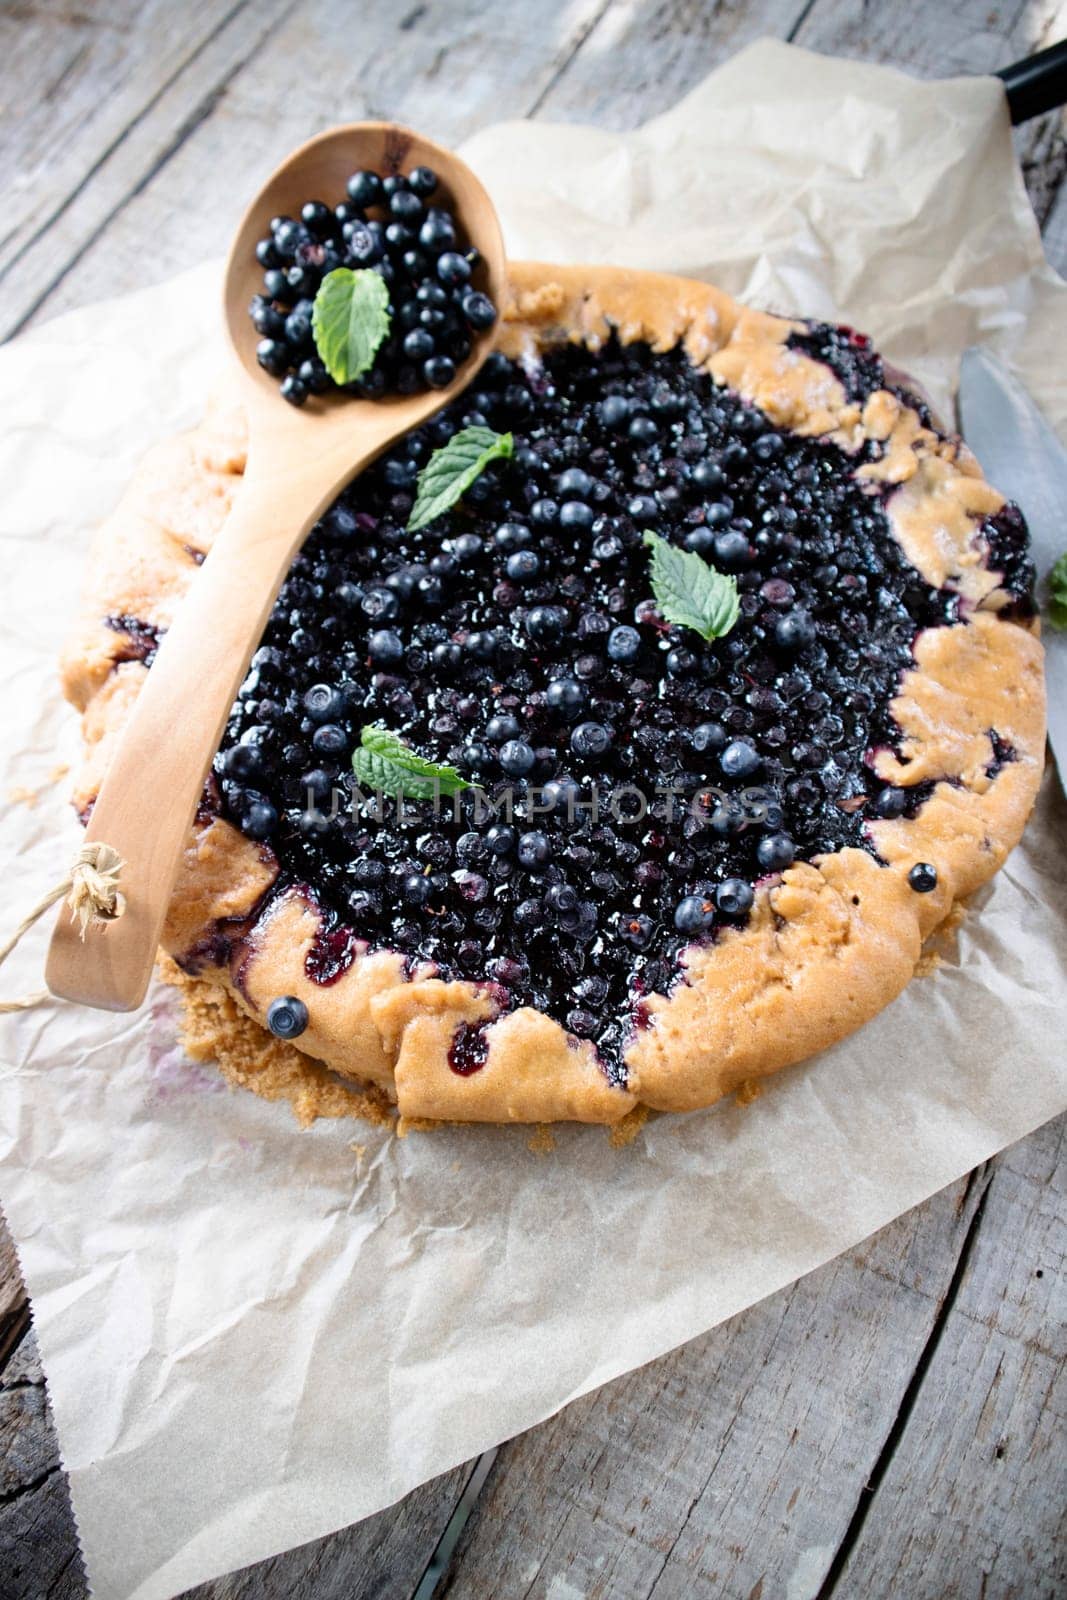 Rustic presentation of a wild blueberry-based cake by fotografiche.eu